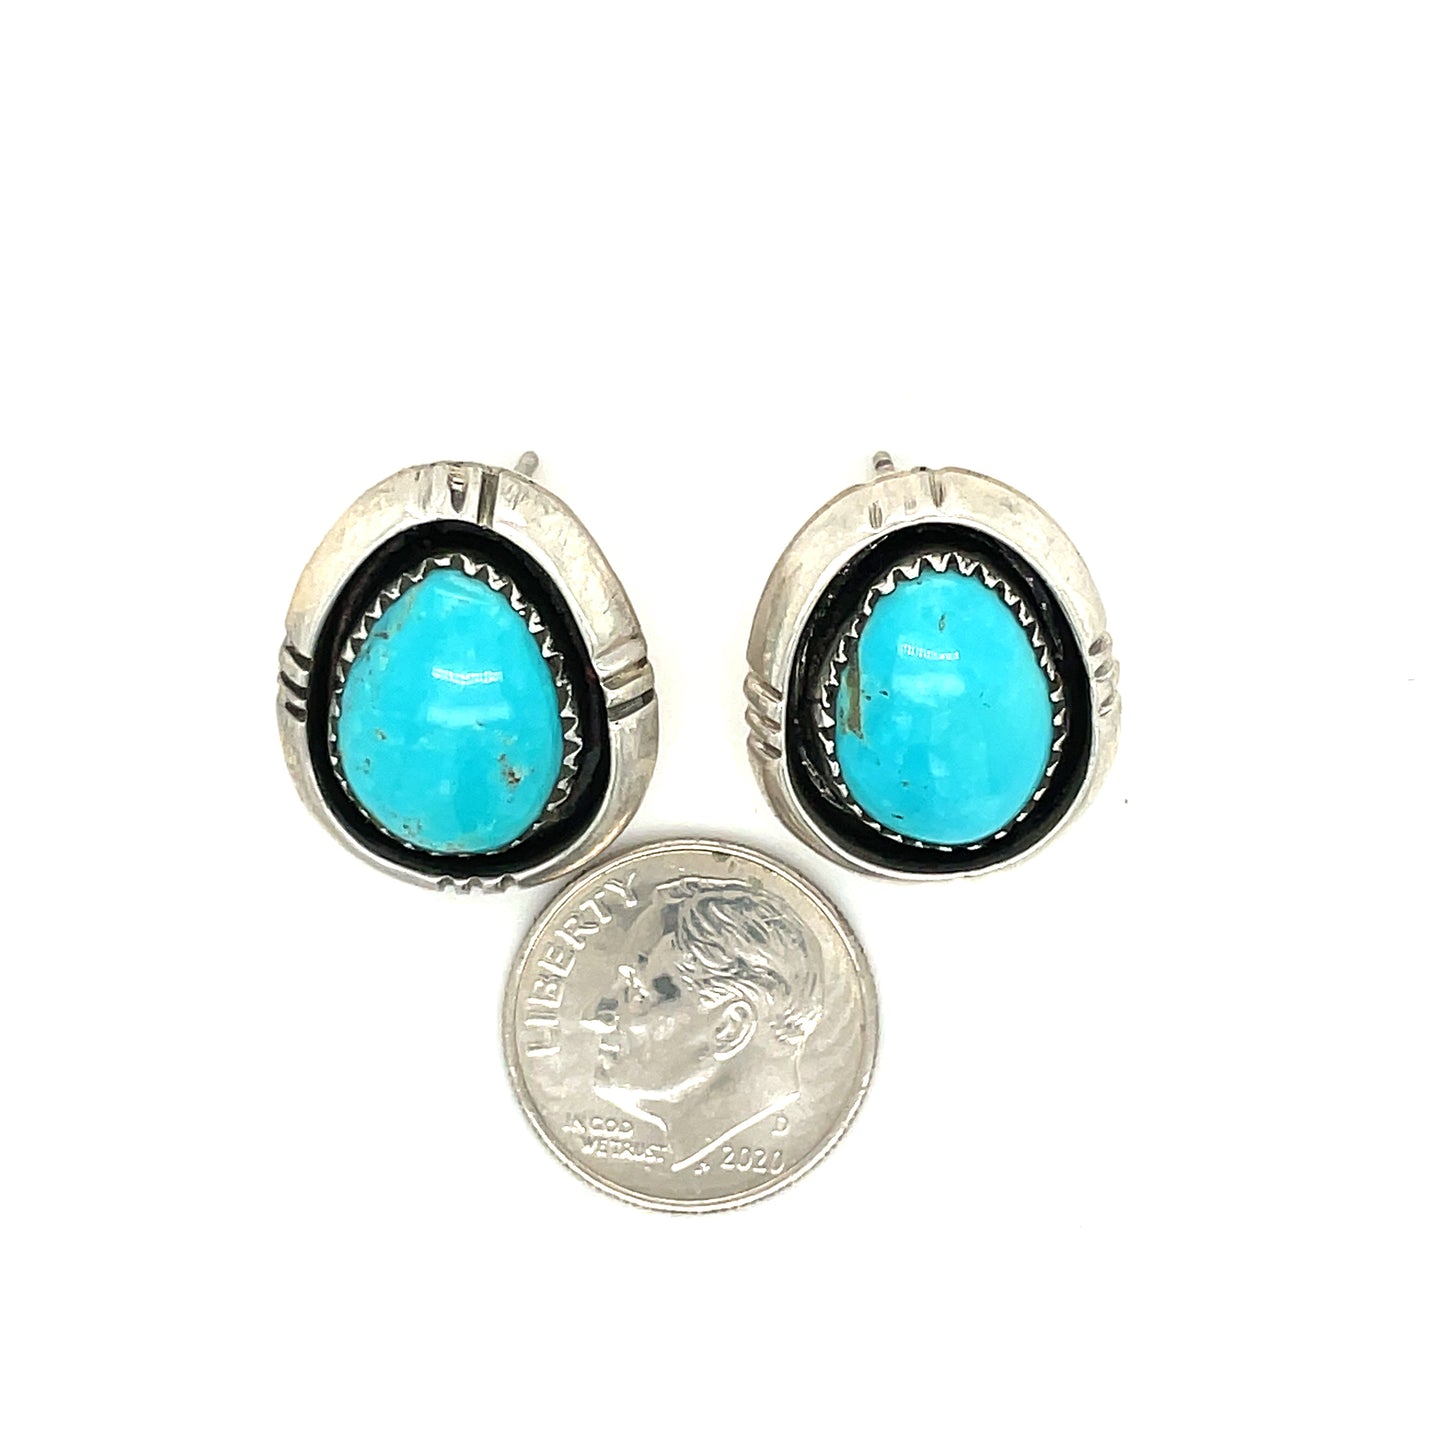 Vintage Sterling Silver and Turquoise Earrings New Old Stock